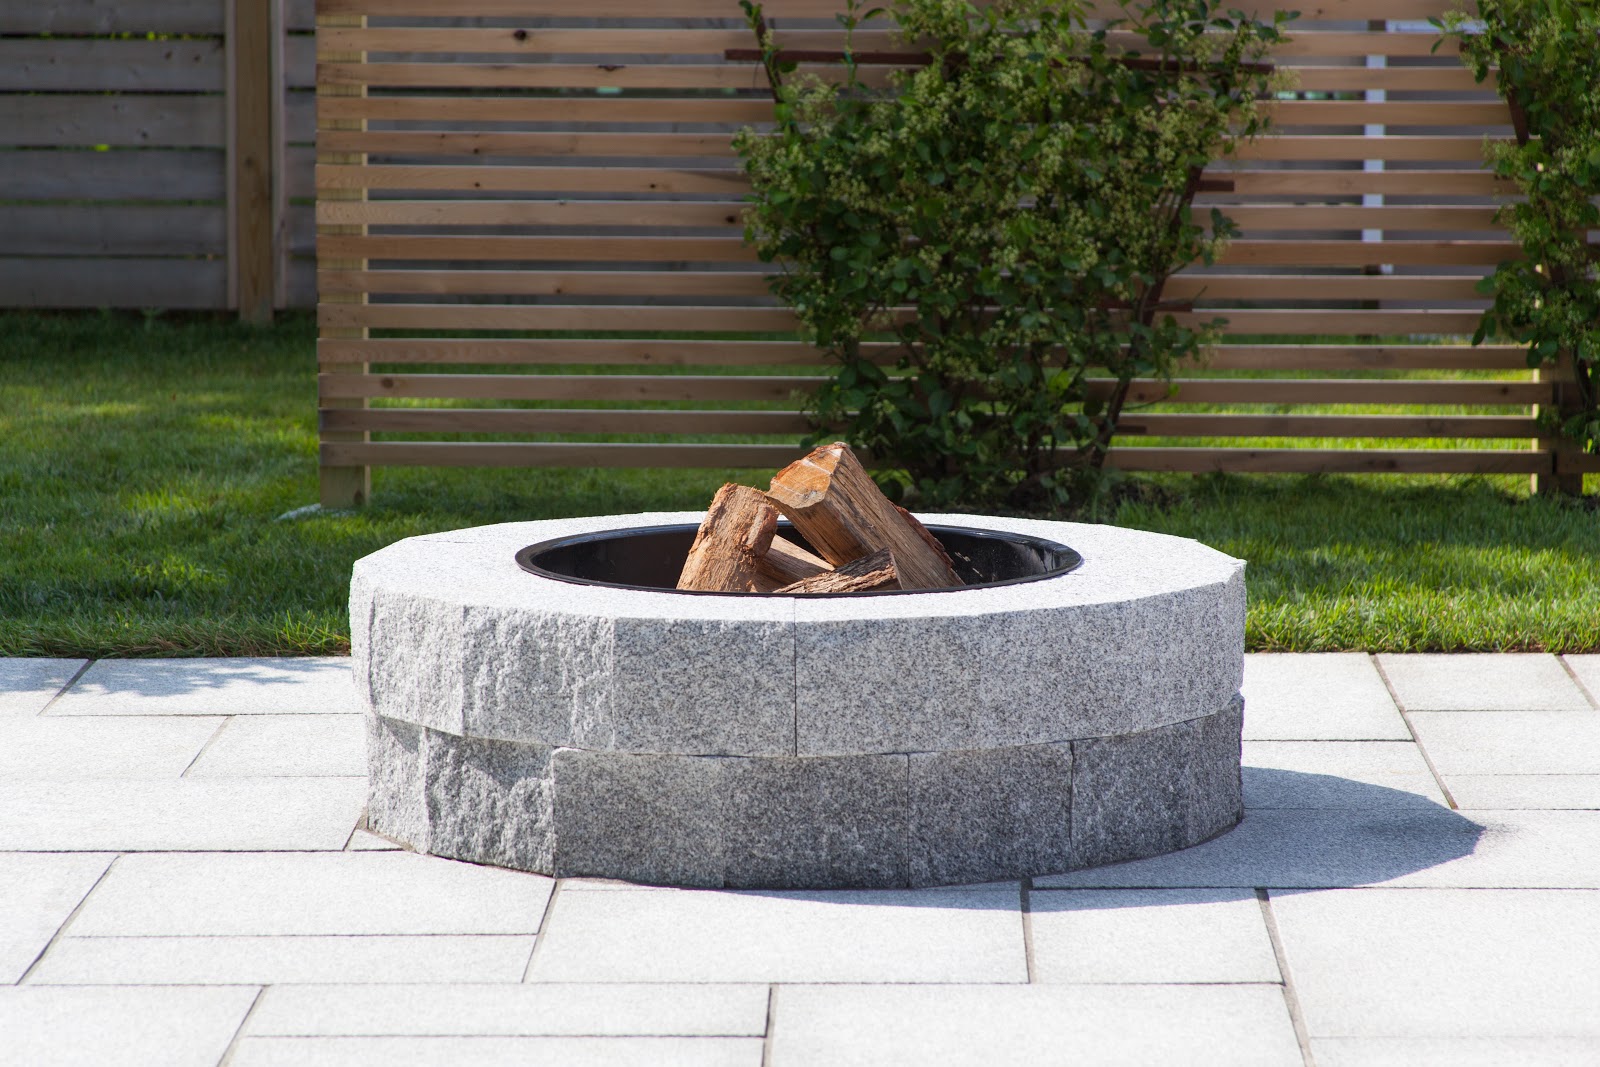 Polycor Hardscapes & Masonry how to install a Woodbury Gray 48” diameter, two-tier fire pit over an existing granite paver patio